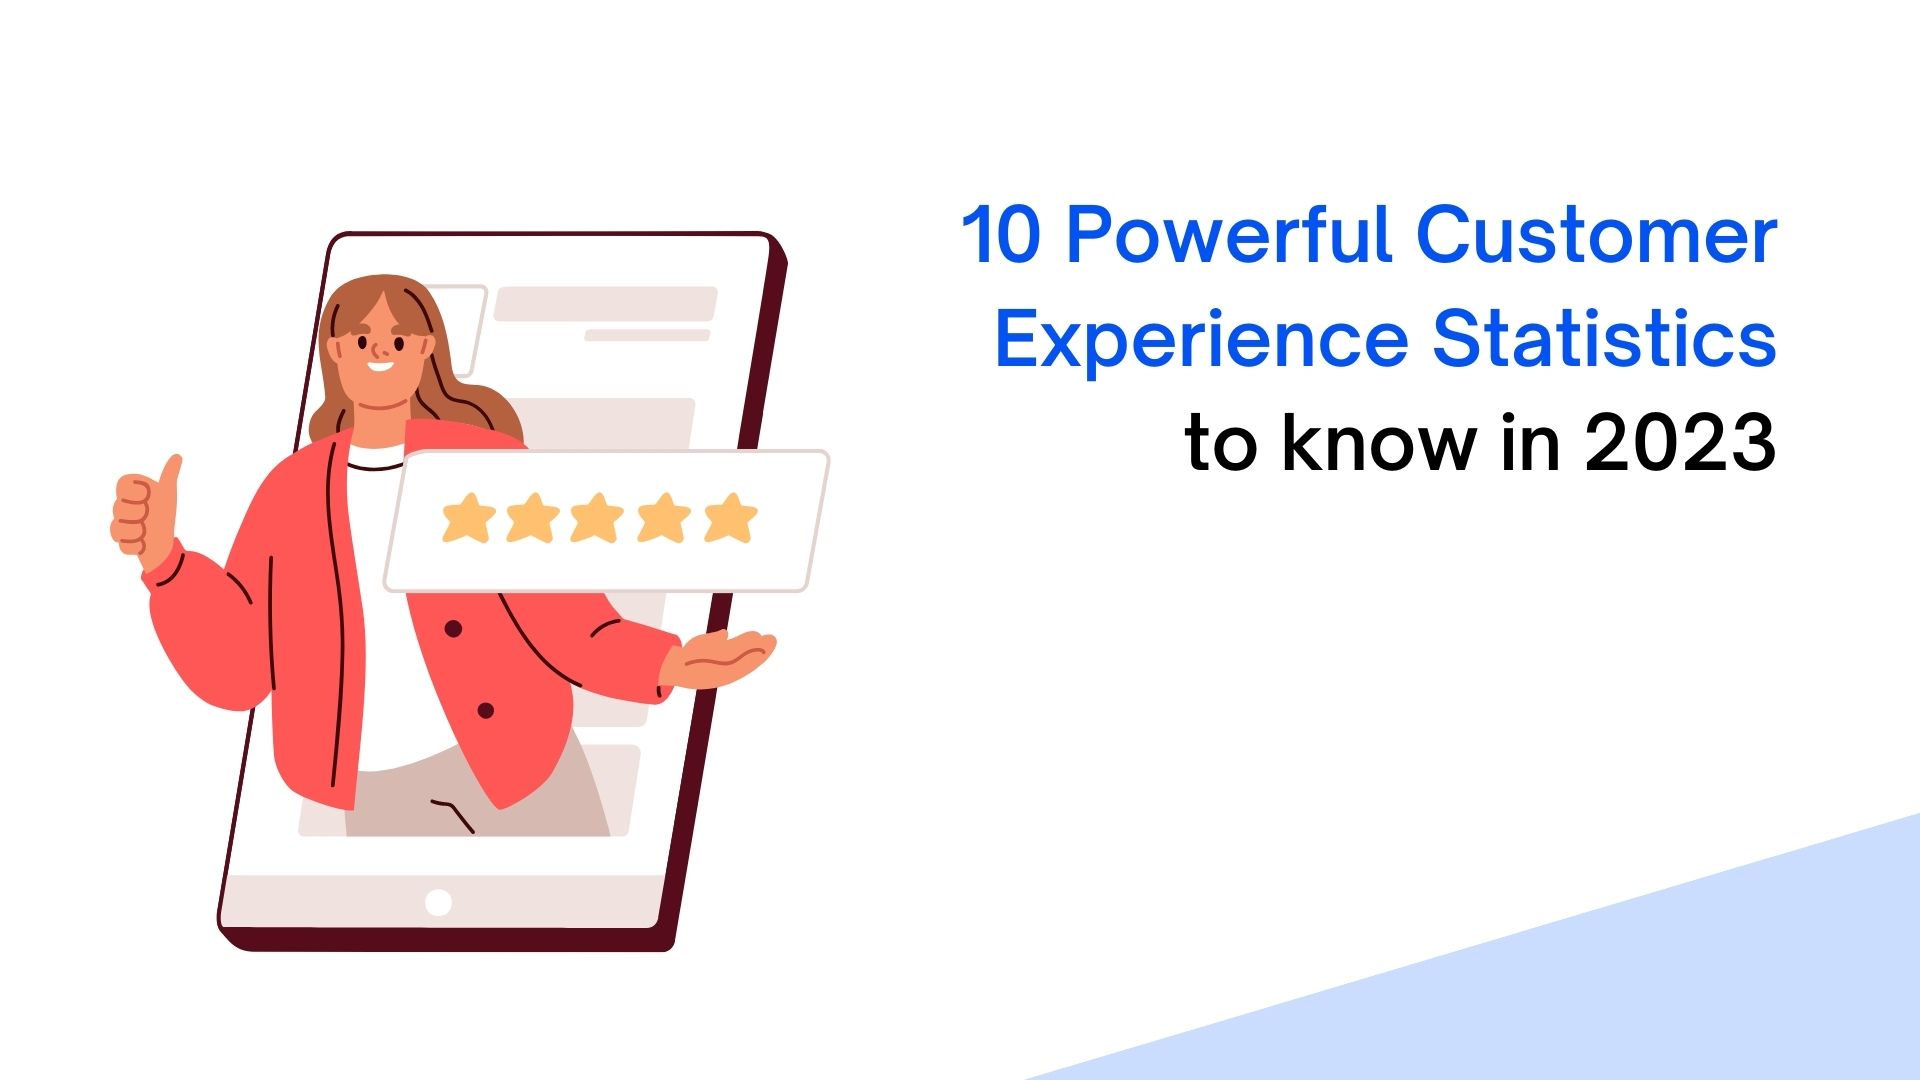 10 Powerful Customer Experience Statistics to know in 2023